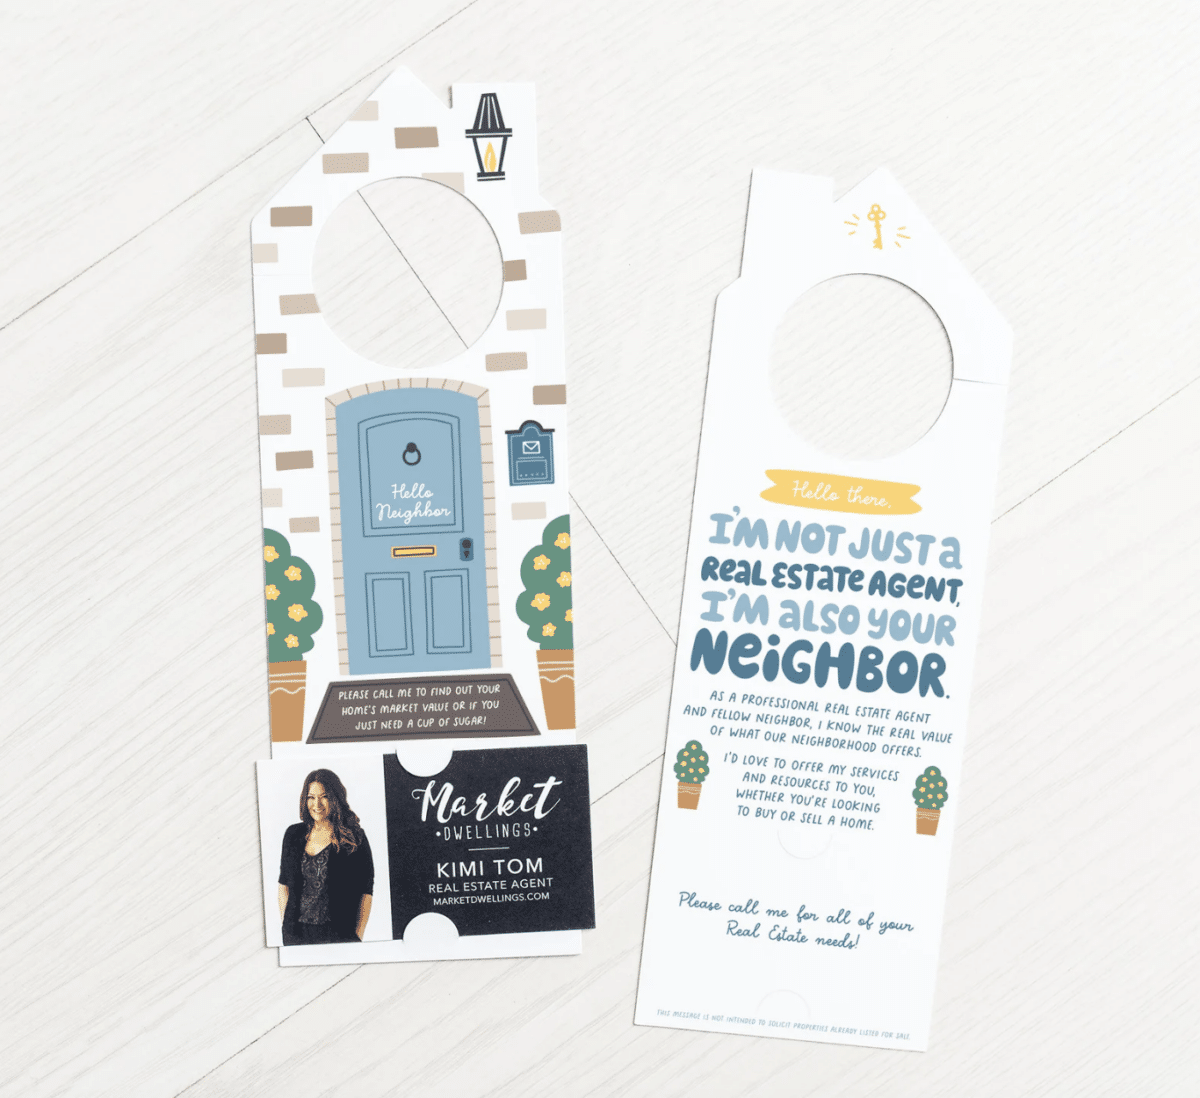 Cute door hanger with "I'm not just a real estate agent, I'm also your neighbor" written on it, with colorful animation graphics on the front and back.